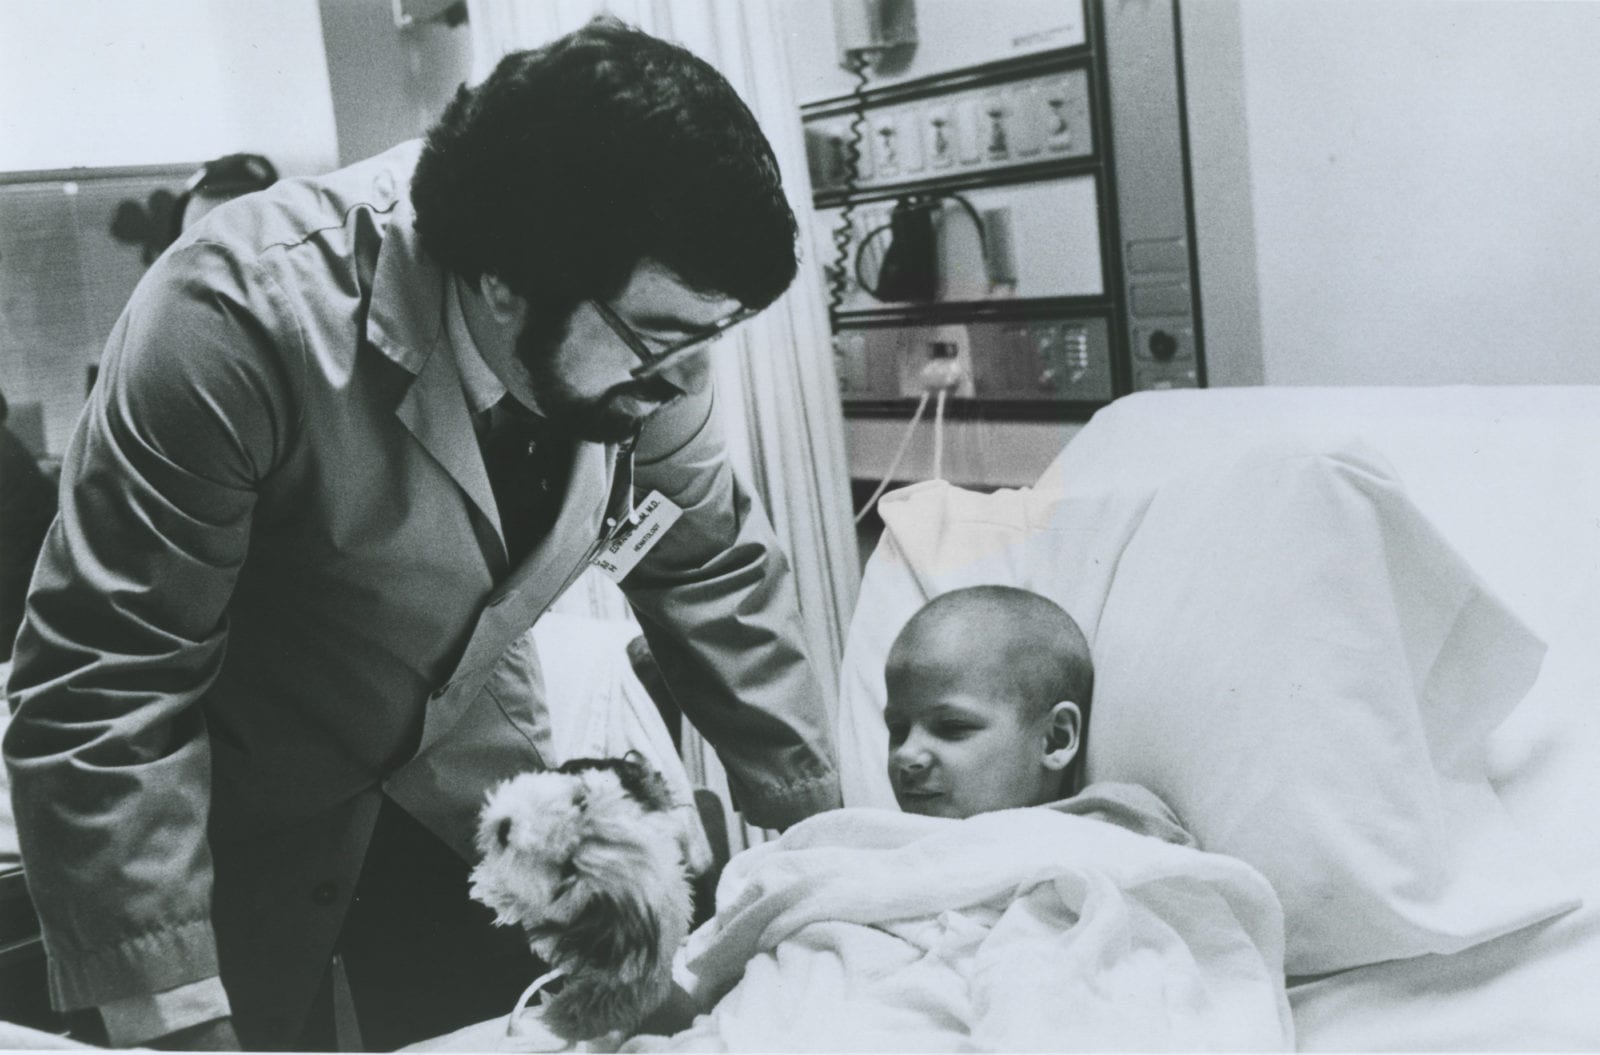 Black and white photo from the 1970s of a doctor with a black beard leaning over a child patient in a hospital bed holding a stuffed animal.